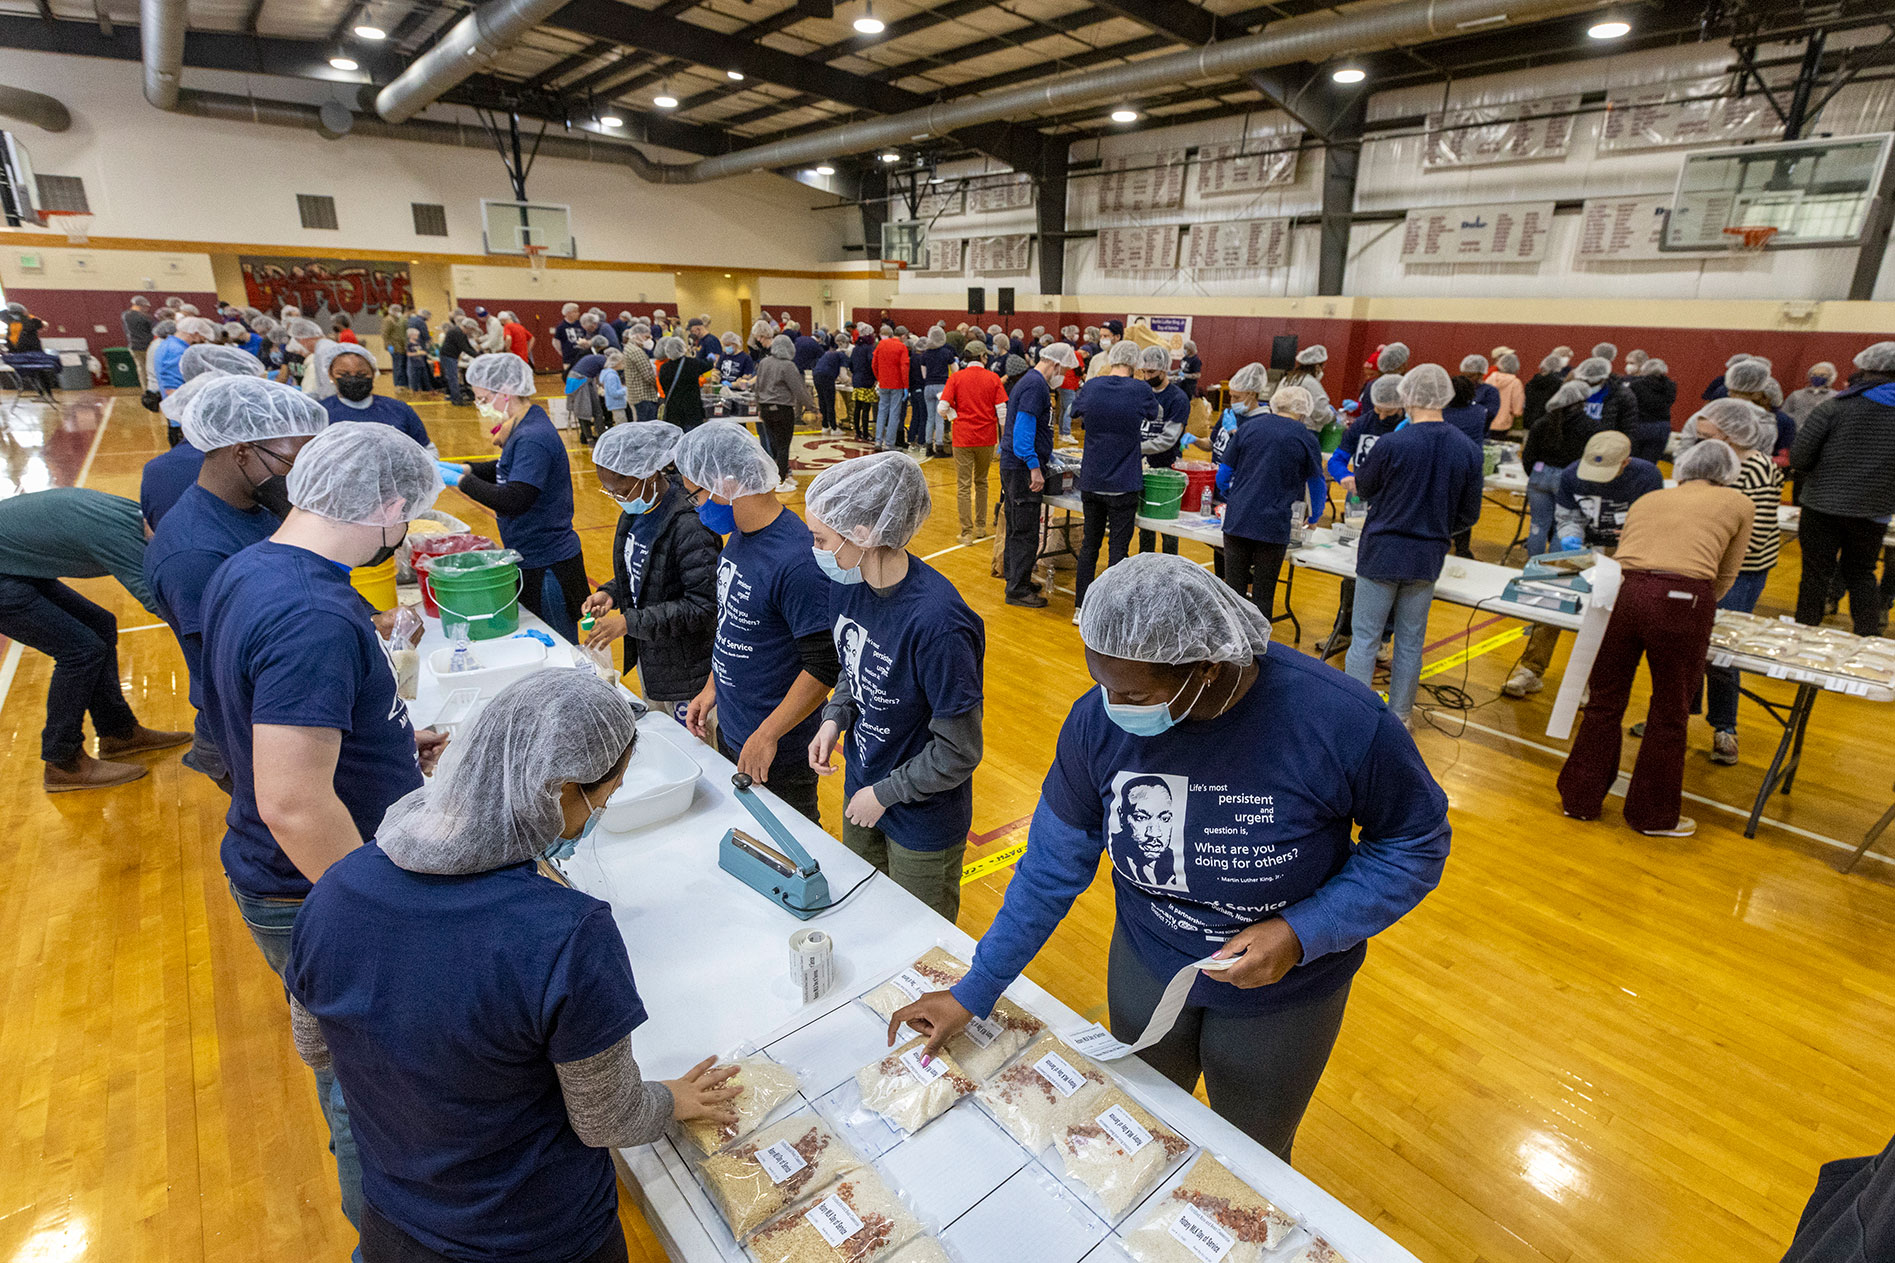 Duke President Vincent Price joined dozens of university students, faculty and staff, along with Triangle Rotary Club members in volunteering to support North Carolina food banks on Monday for a 2023 MLK Day of Service event supporting Interfaith Food Shuttle and Meals of Hope.
